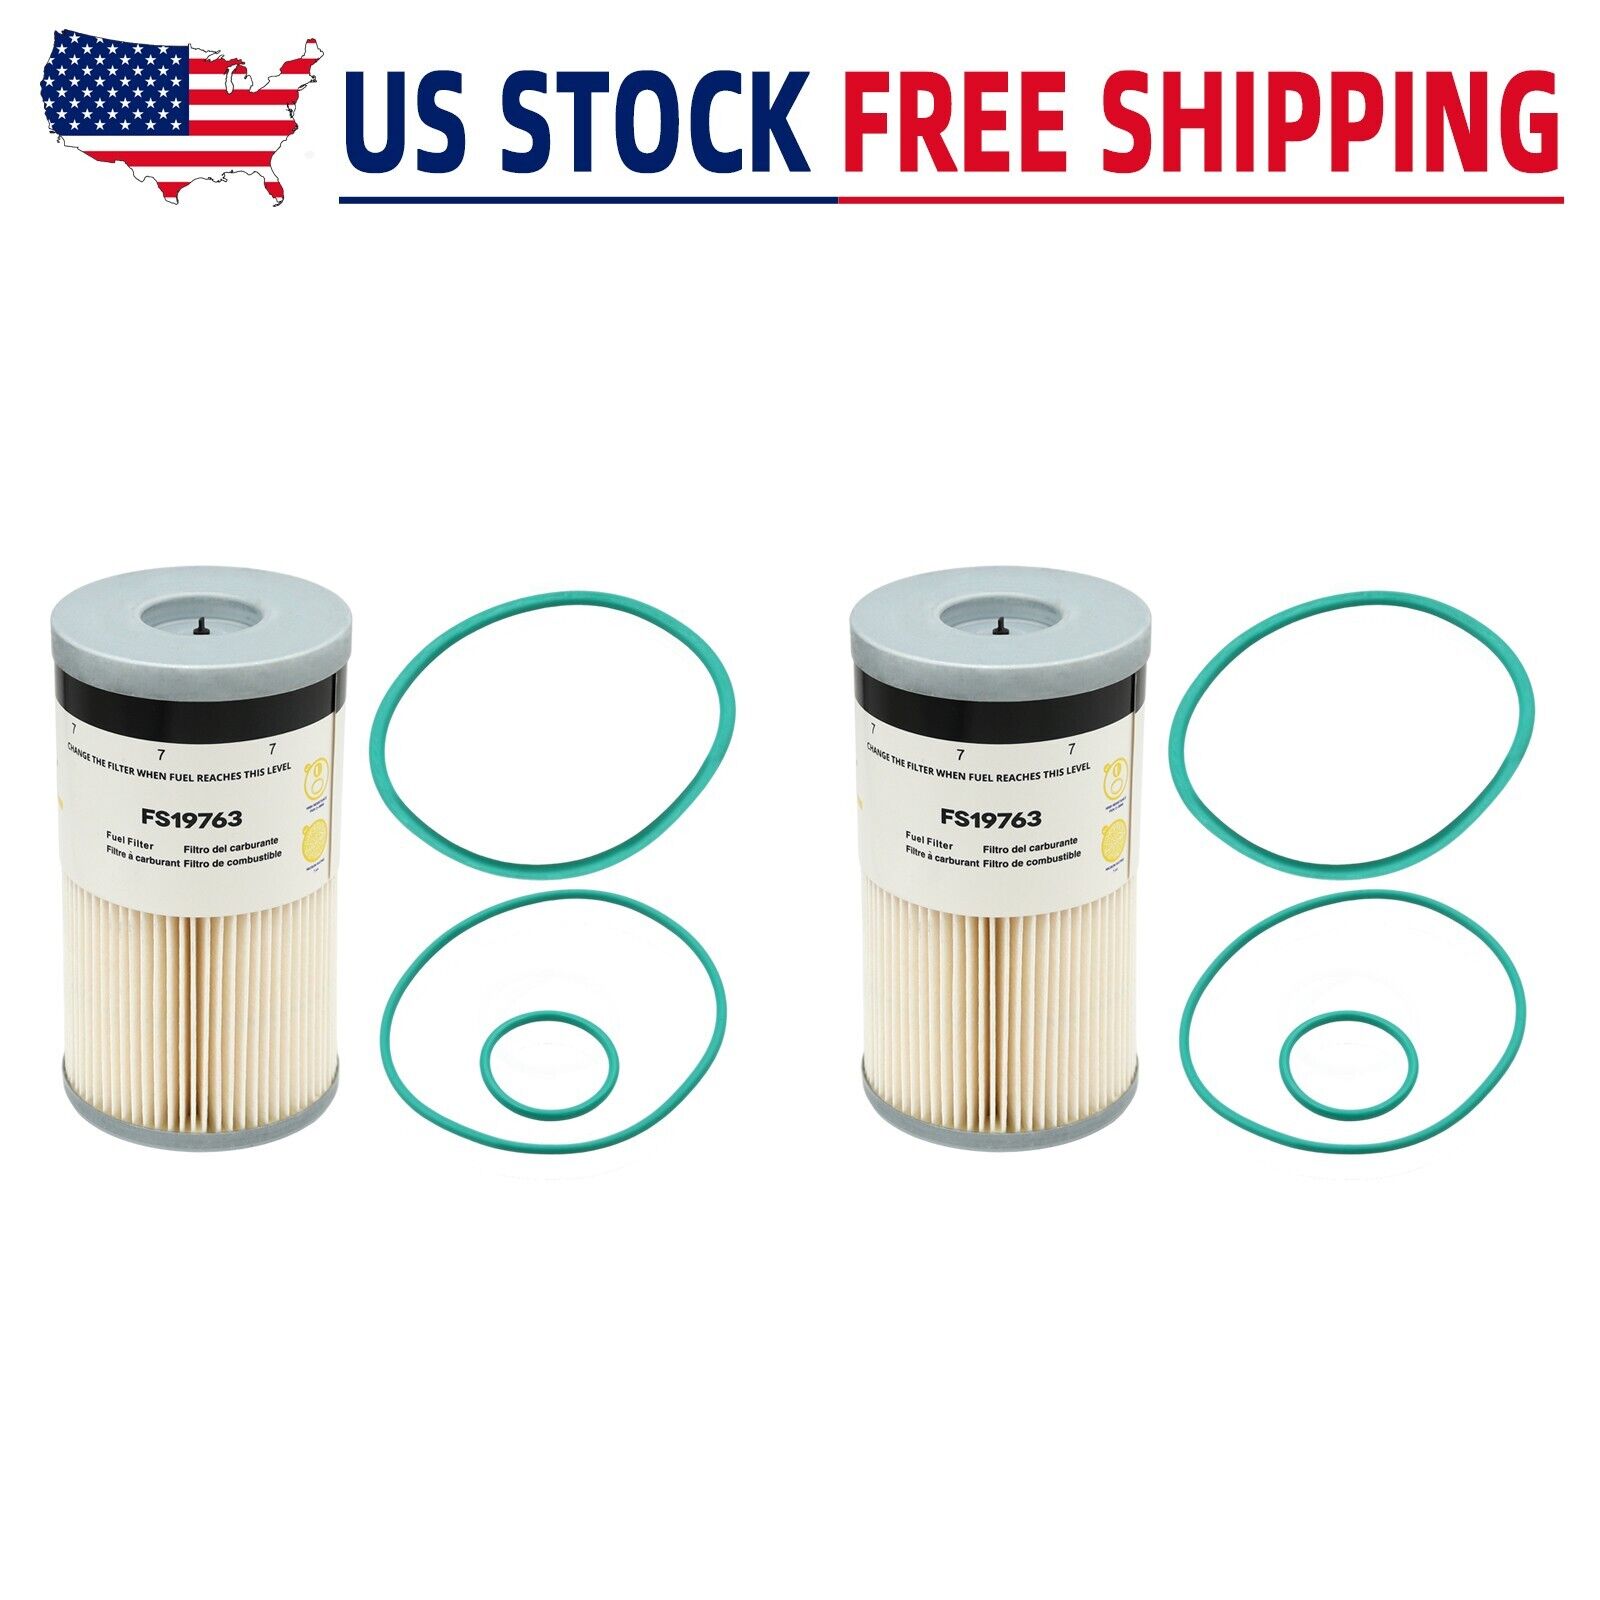 Kit of 2- For FleetGuard Fuel Filter with Water Separator FS19763 7micron